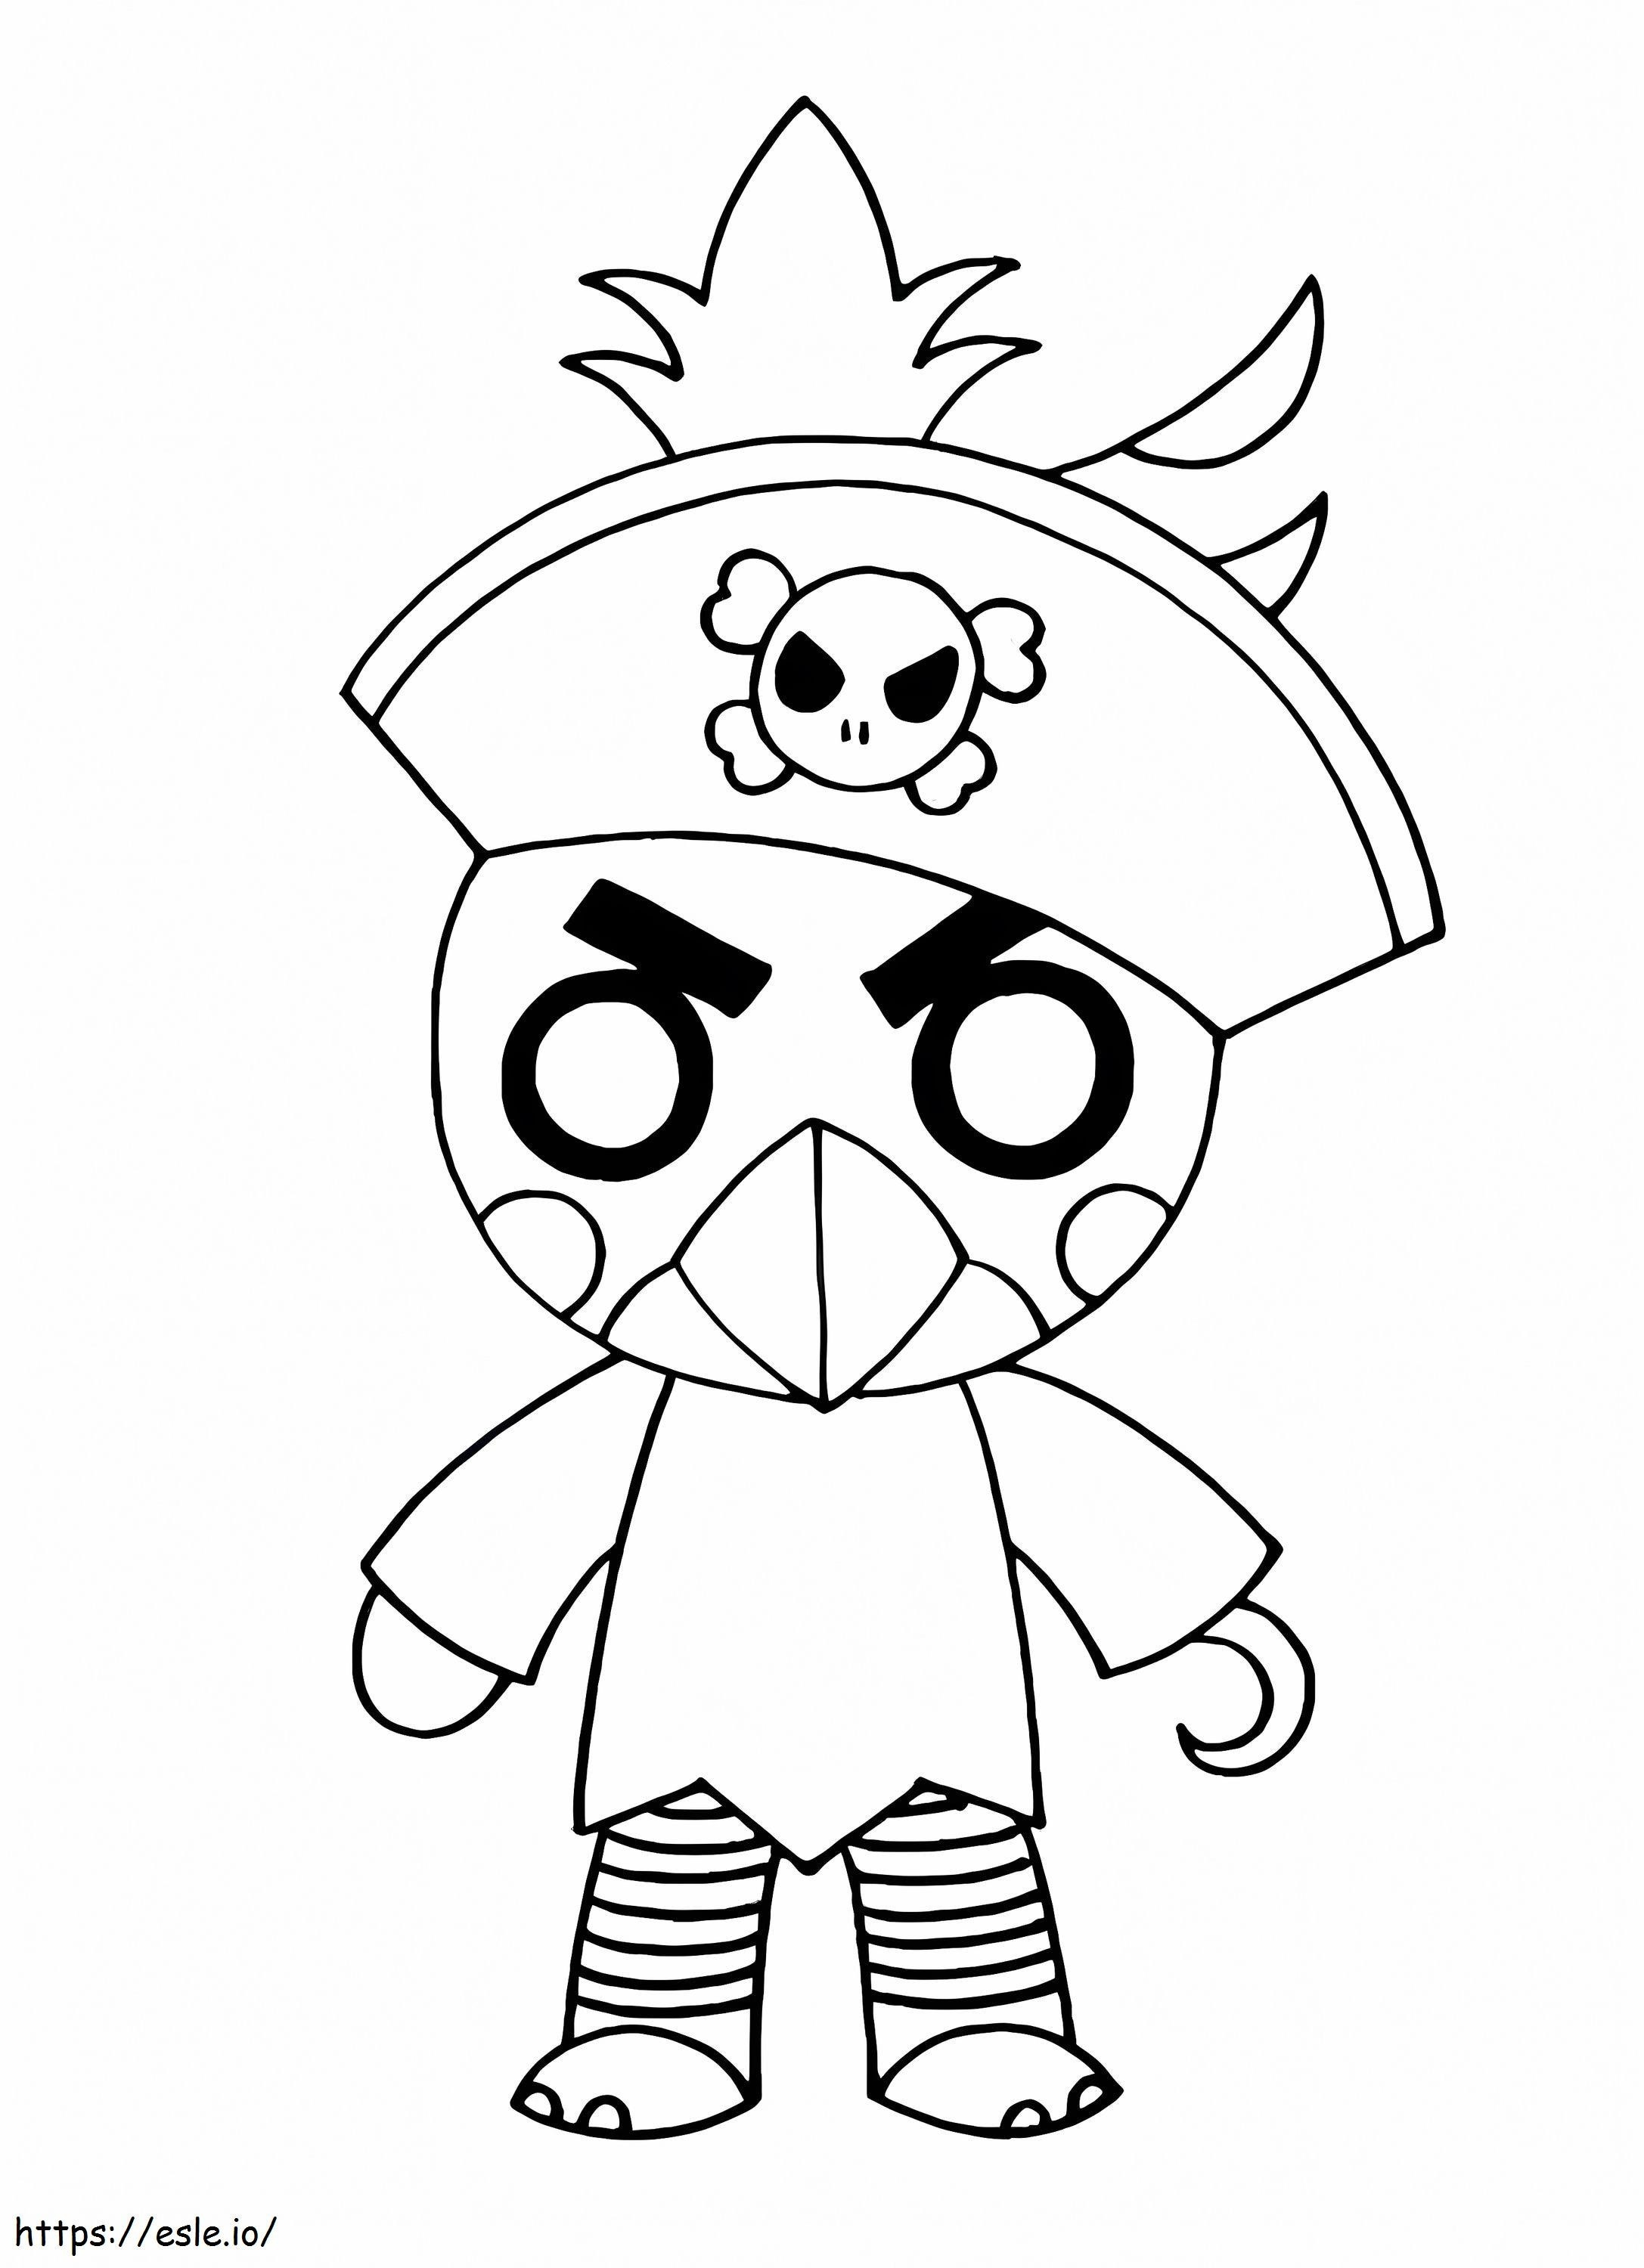 Roblox Piggy Budgey With Pirate Hat coloring page